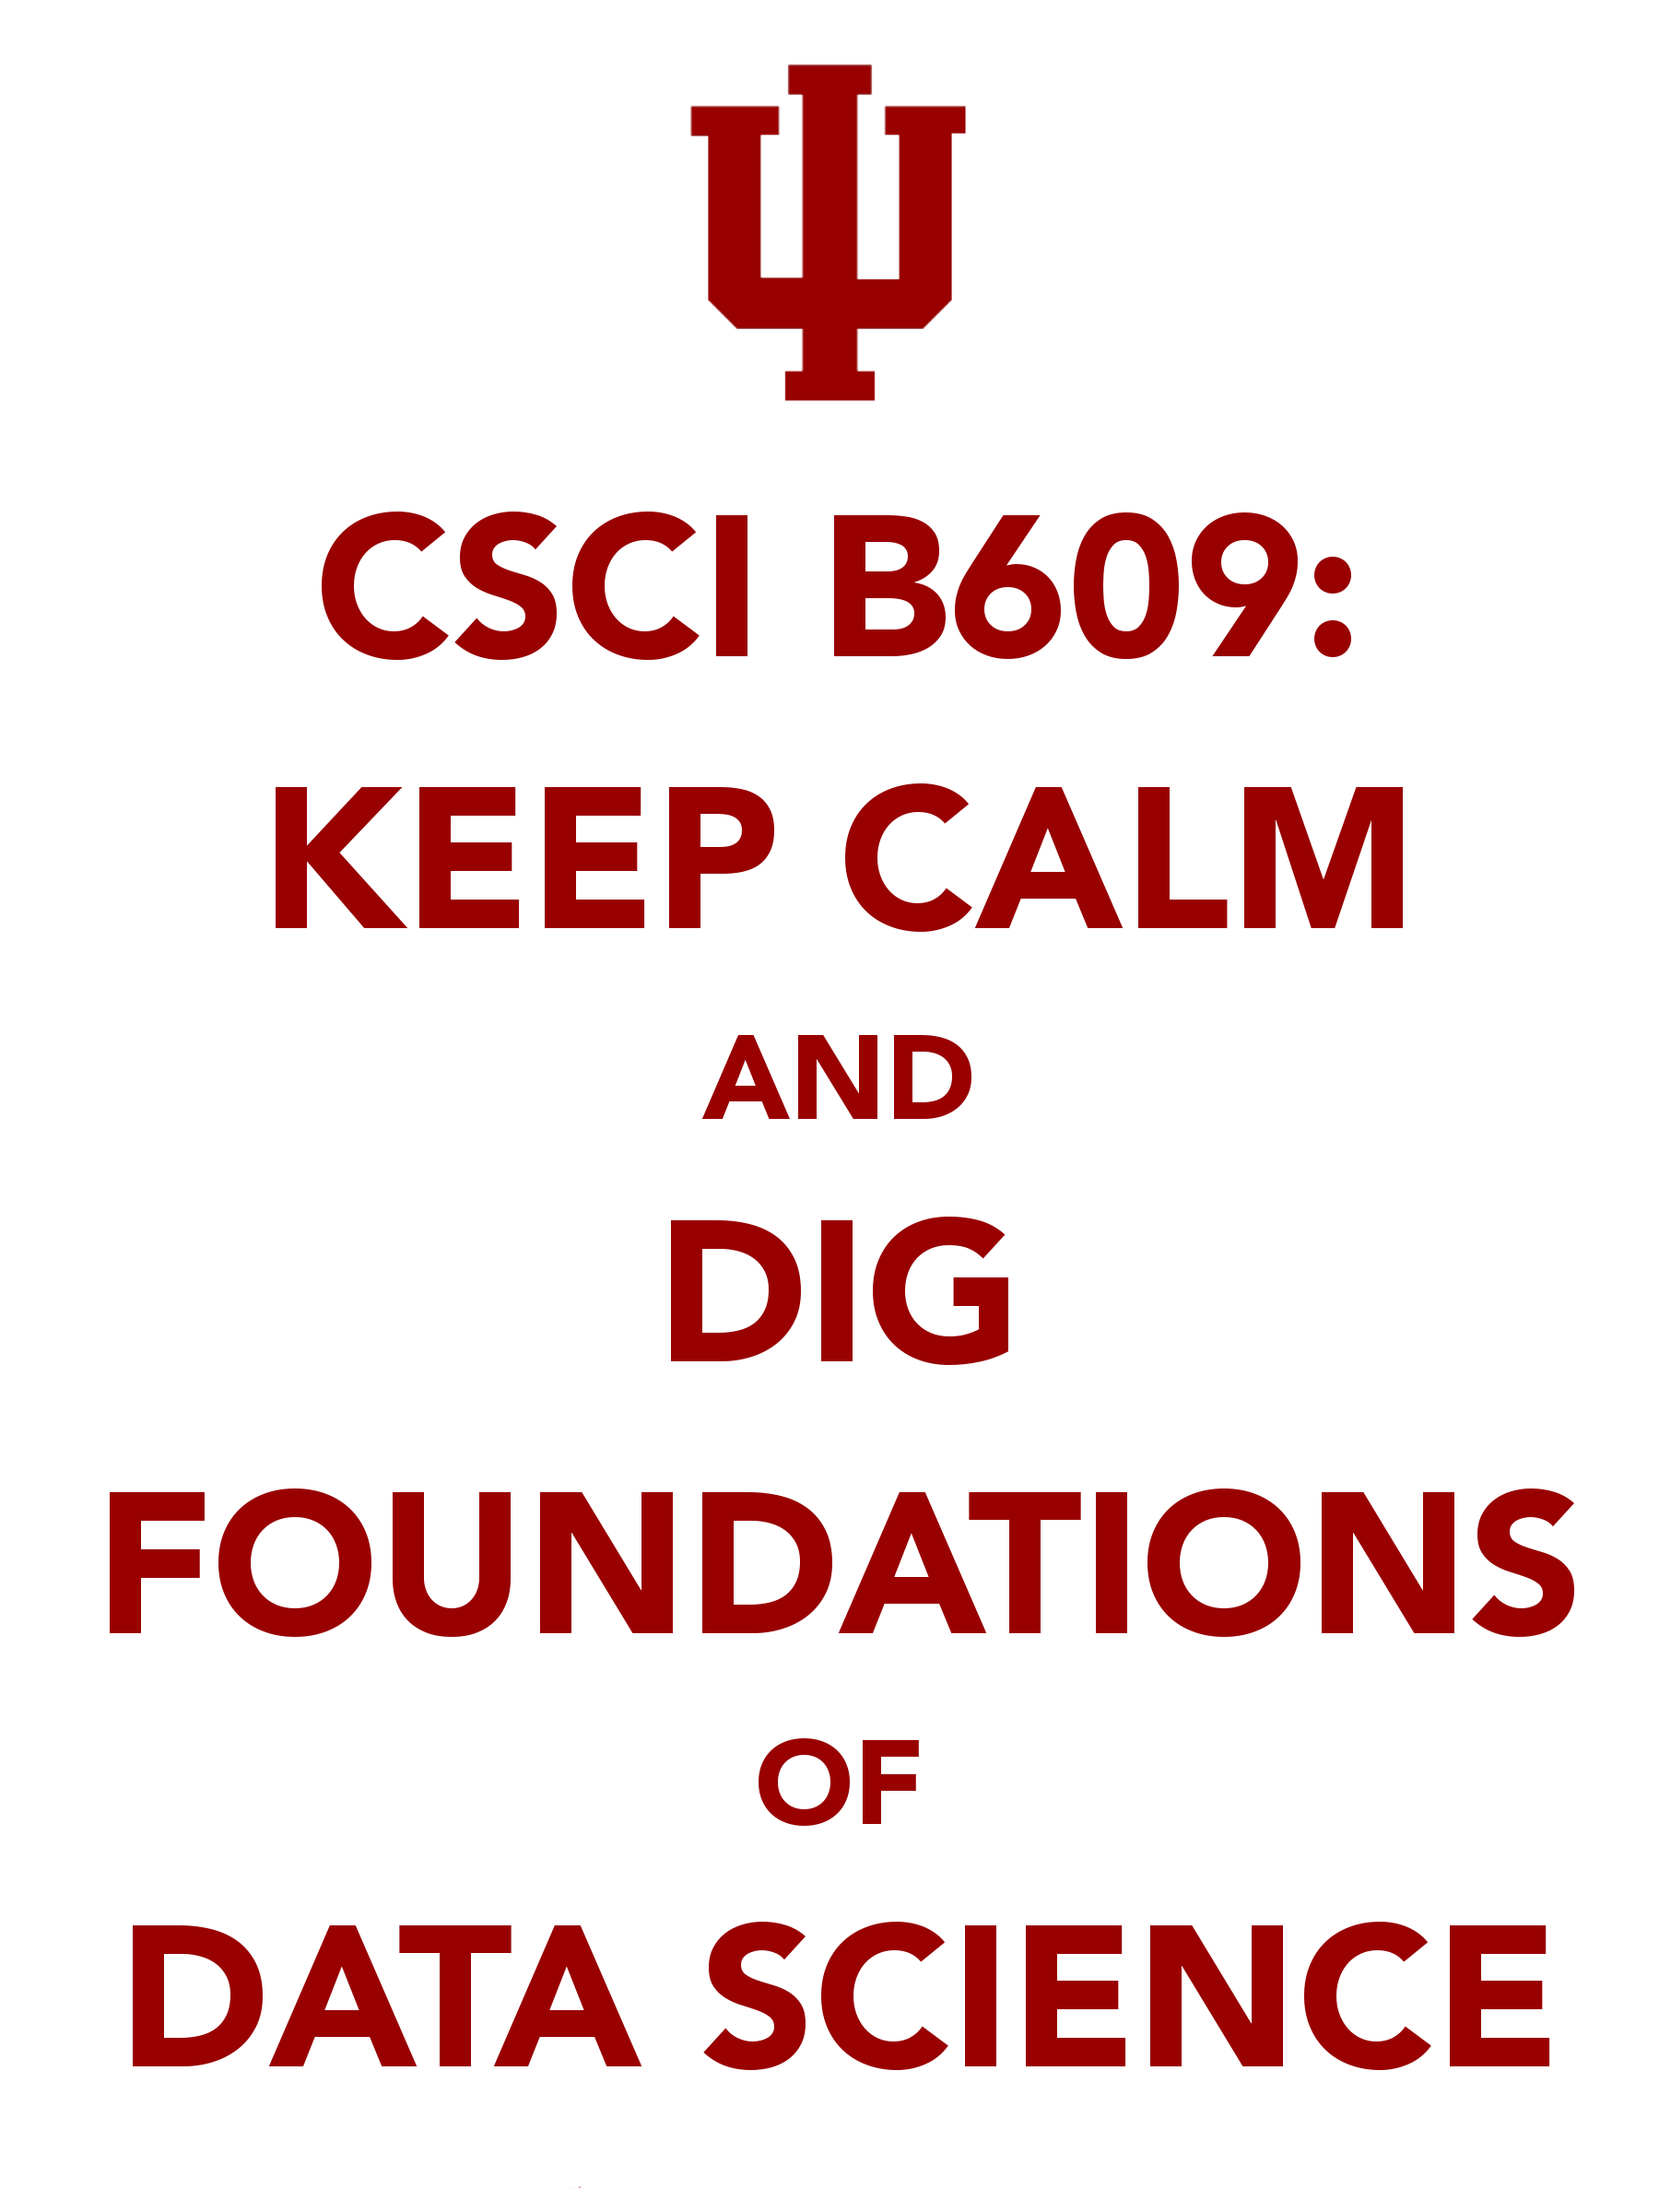 Keep calm and dig foundations of Data Science